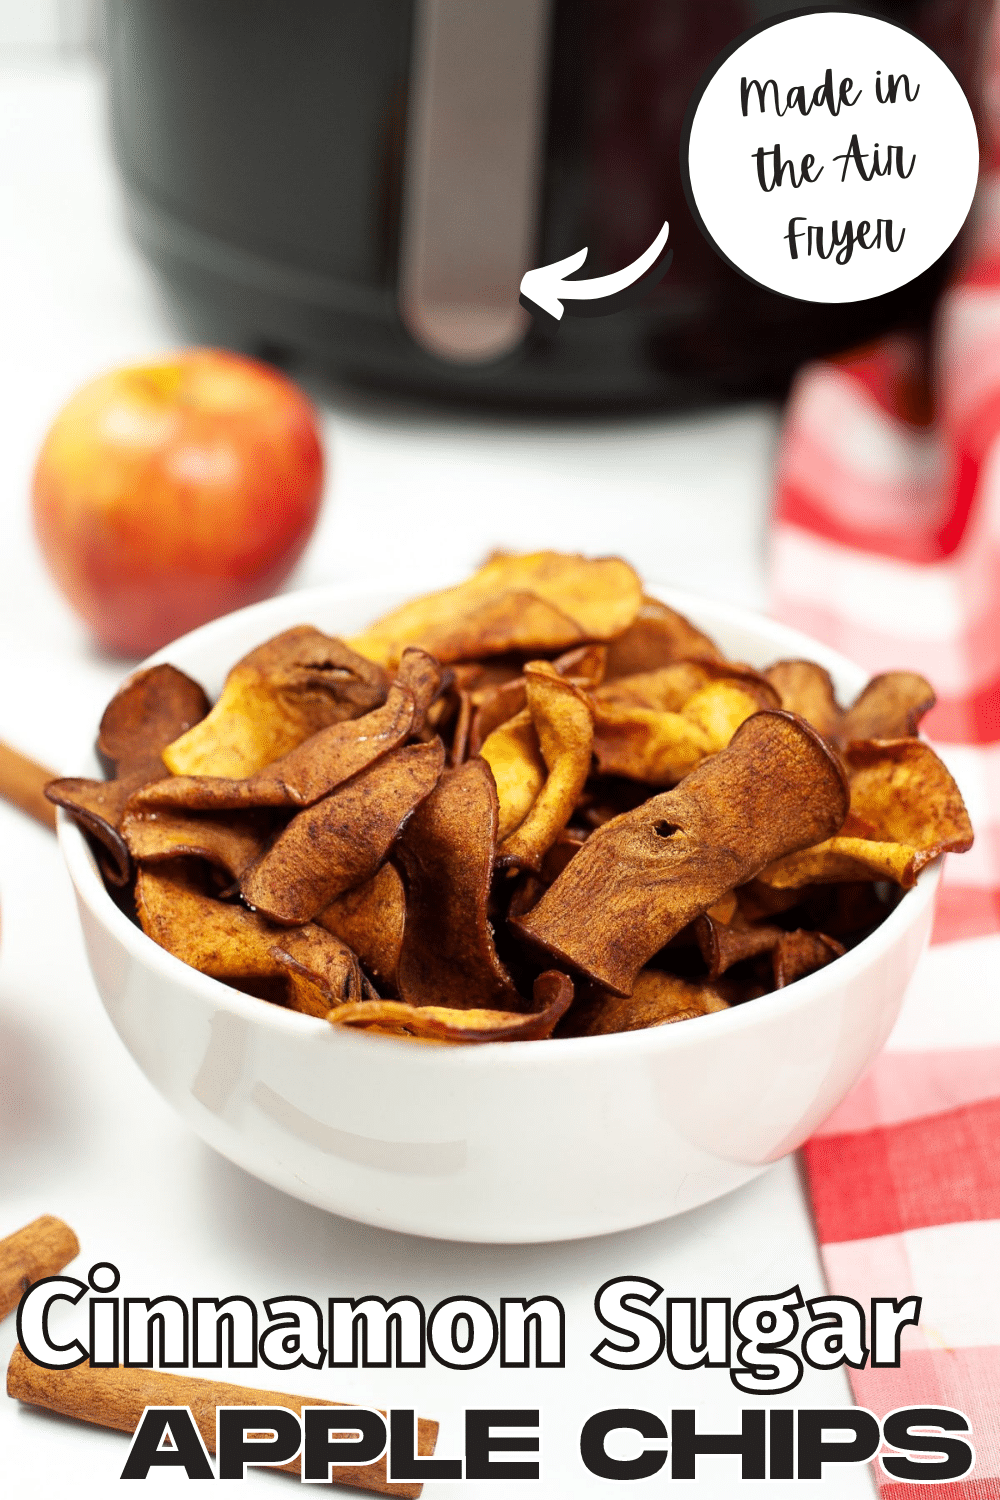 A vertical image of Air Fryer Cinnamon Apple Chips with a circled text at the top part saying "Made in the air fryer" and a larger text at the bottom saying "Cinnamon Sugar Apple Chips".